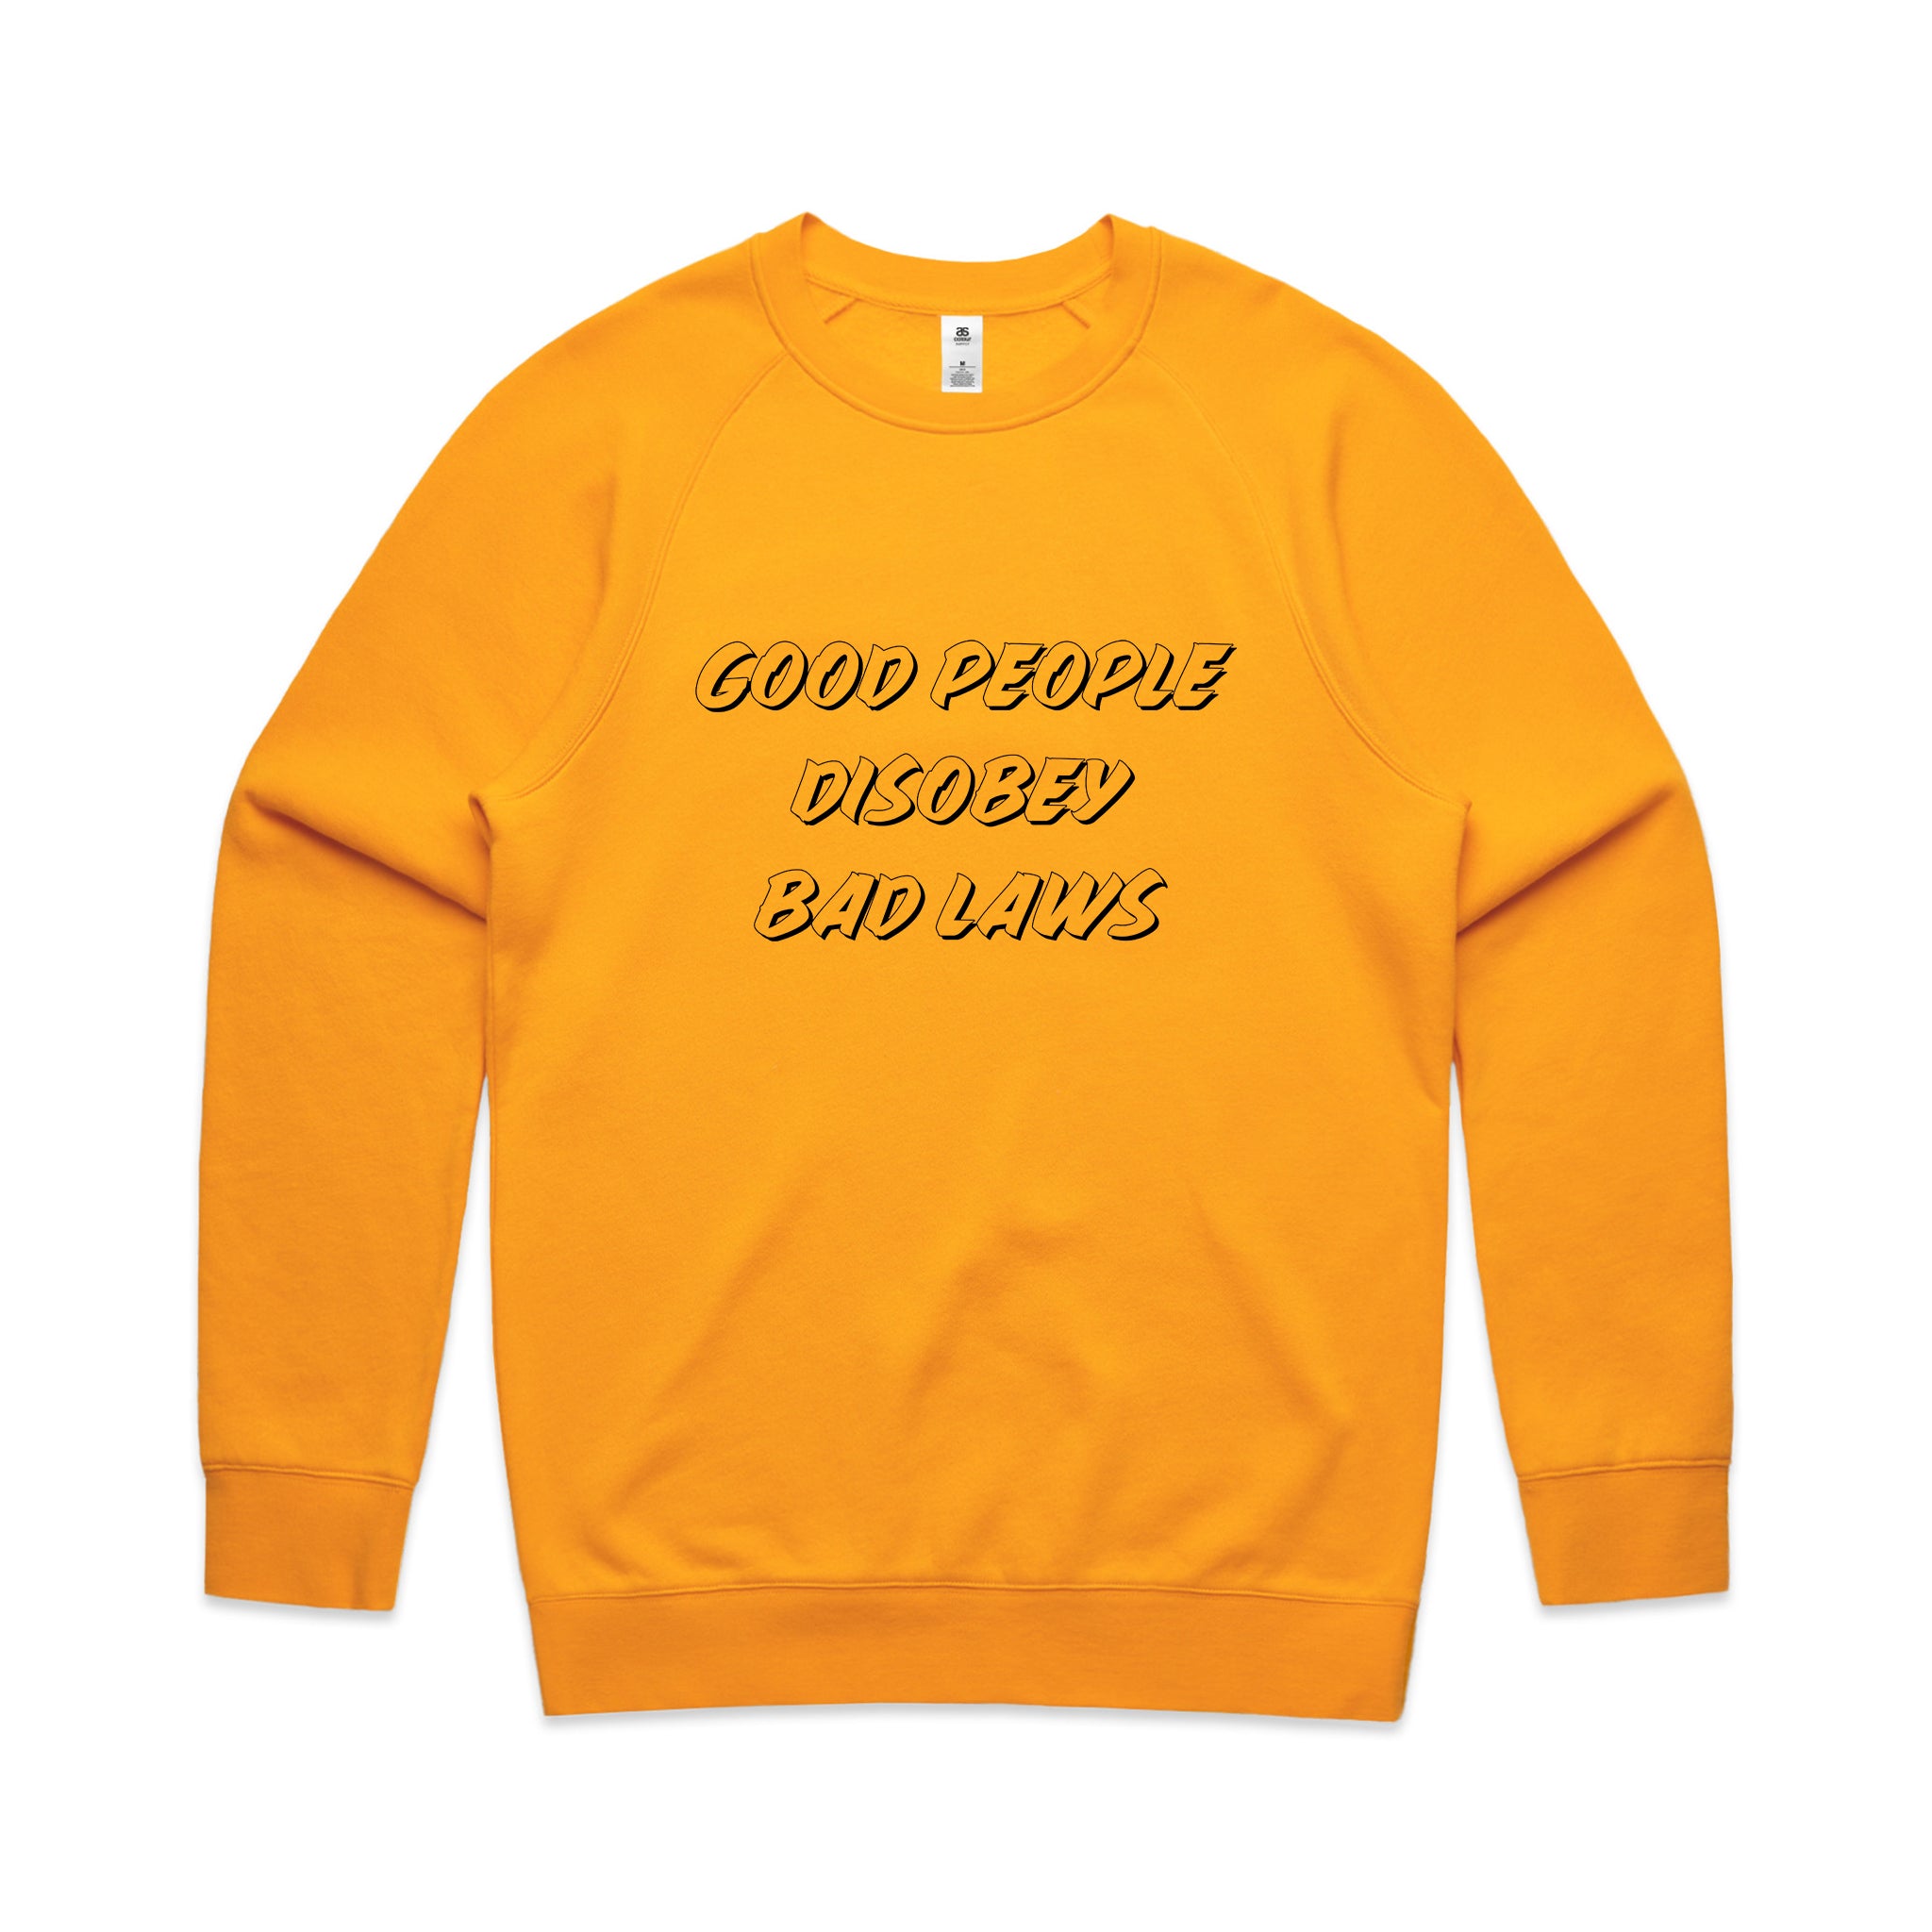 Good People Disobey Bad Laws Jumper